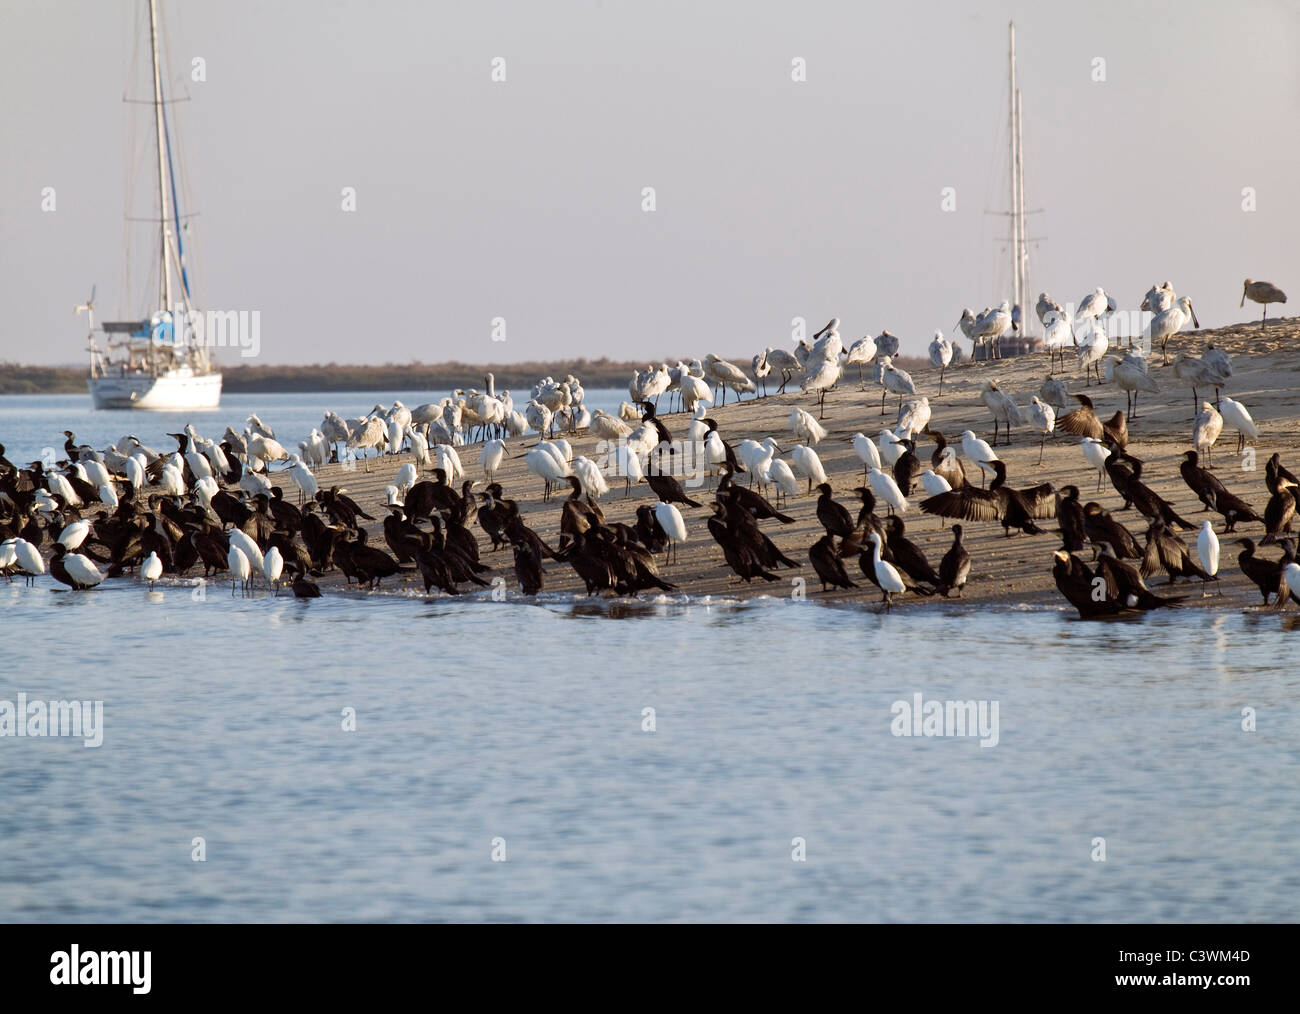 A large flock of wading birds feeding in the natural park of Ria Formosa lagoon, Faro, Algarve, Portugal Stock Photo